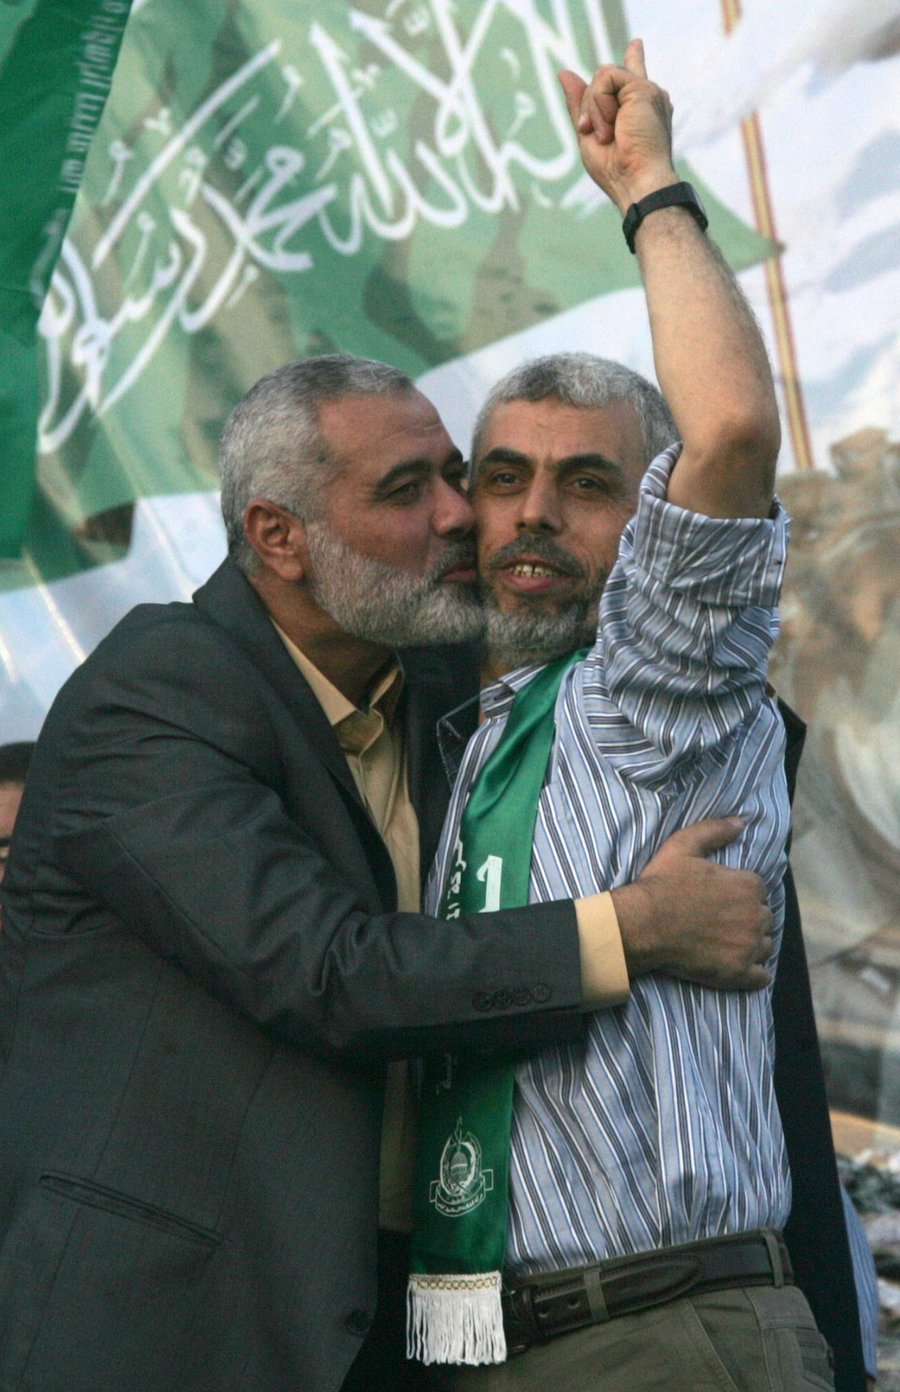 Hamas leader Ismail Haniya kisses freed Palestinian prisoner Yehiye Sinwar, a founder of Hamas' military wing, wave as Hamas supporters celebrate the release of hundreds of prisoners in the Shalit deal.